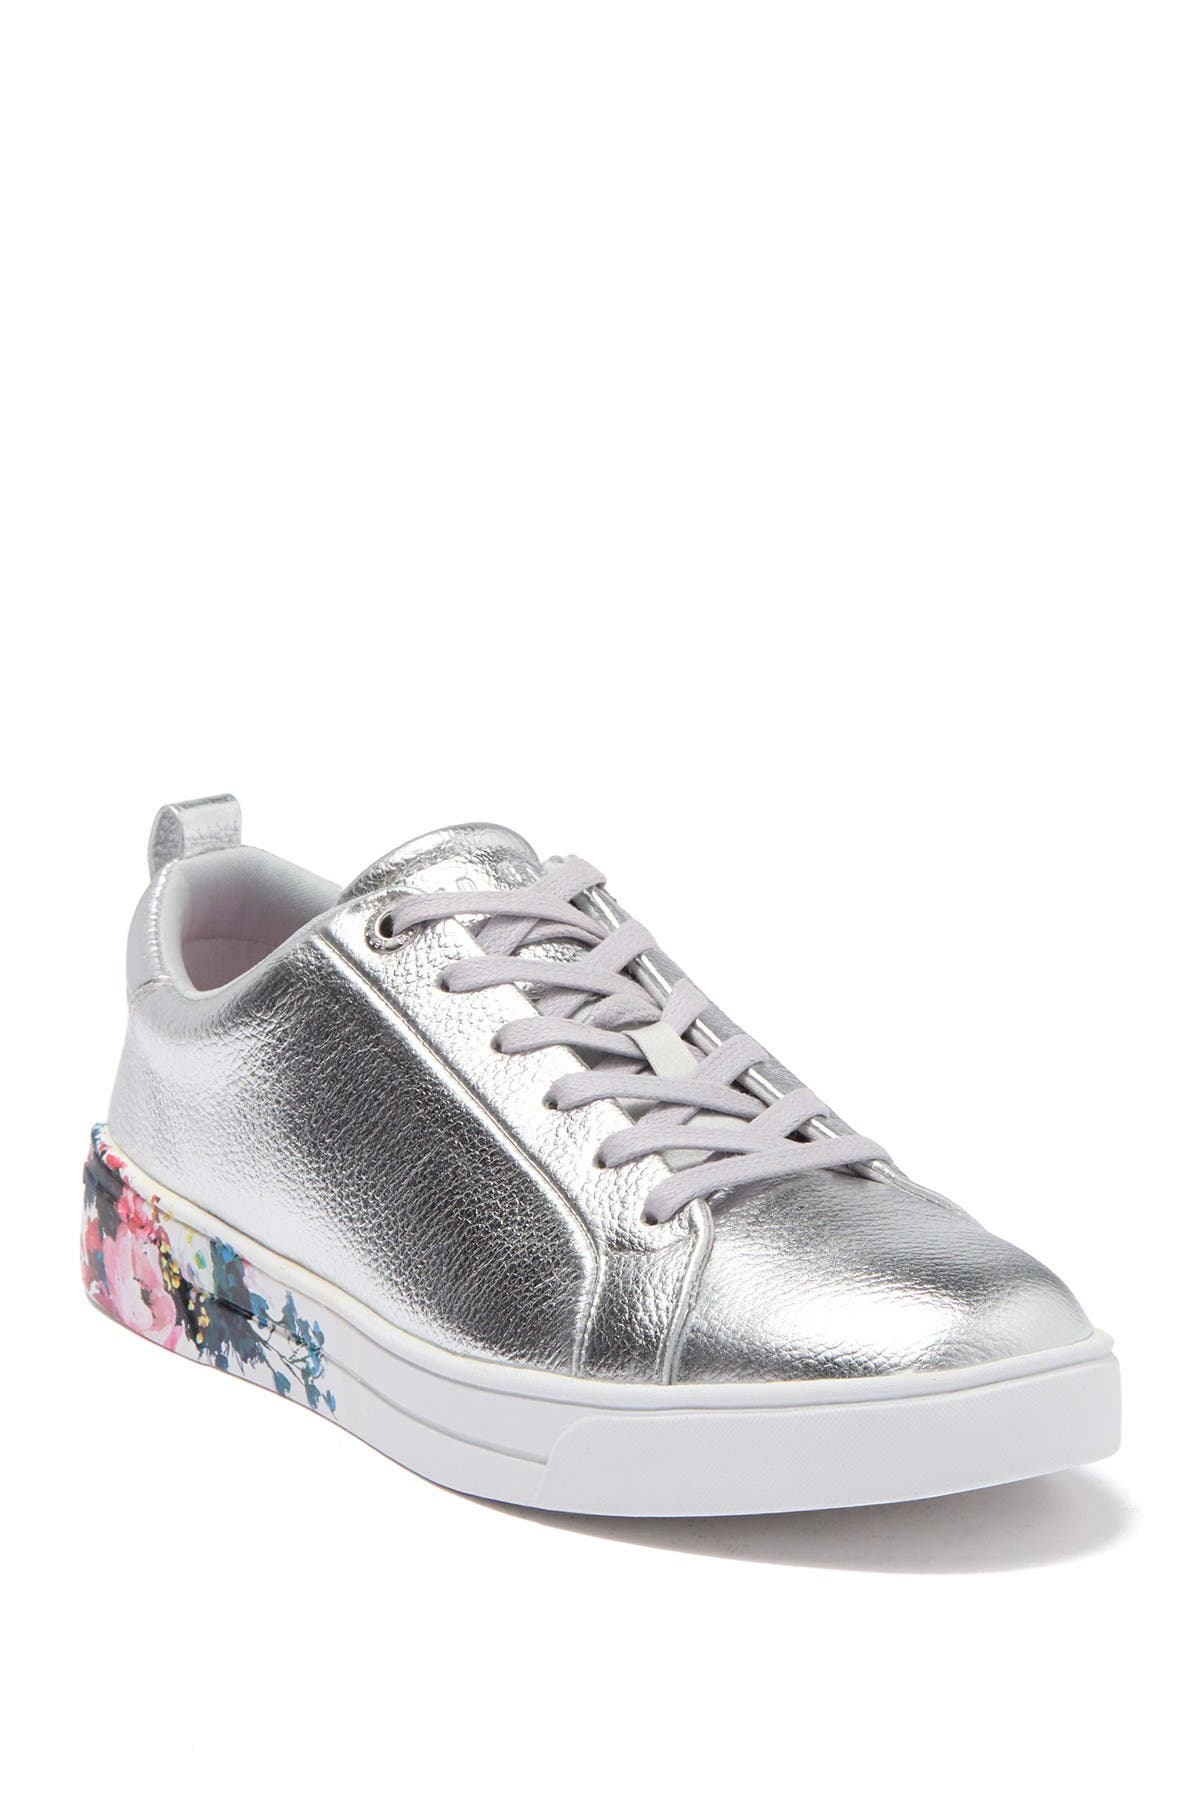 Ted Baker London | Roully Metallic 